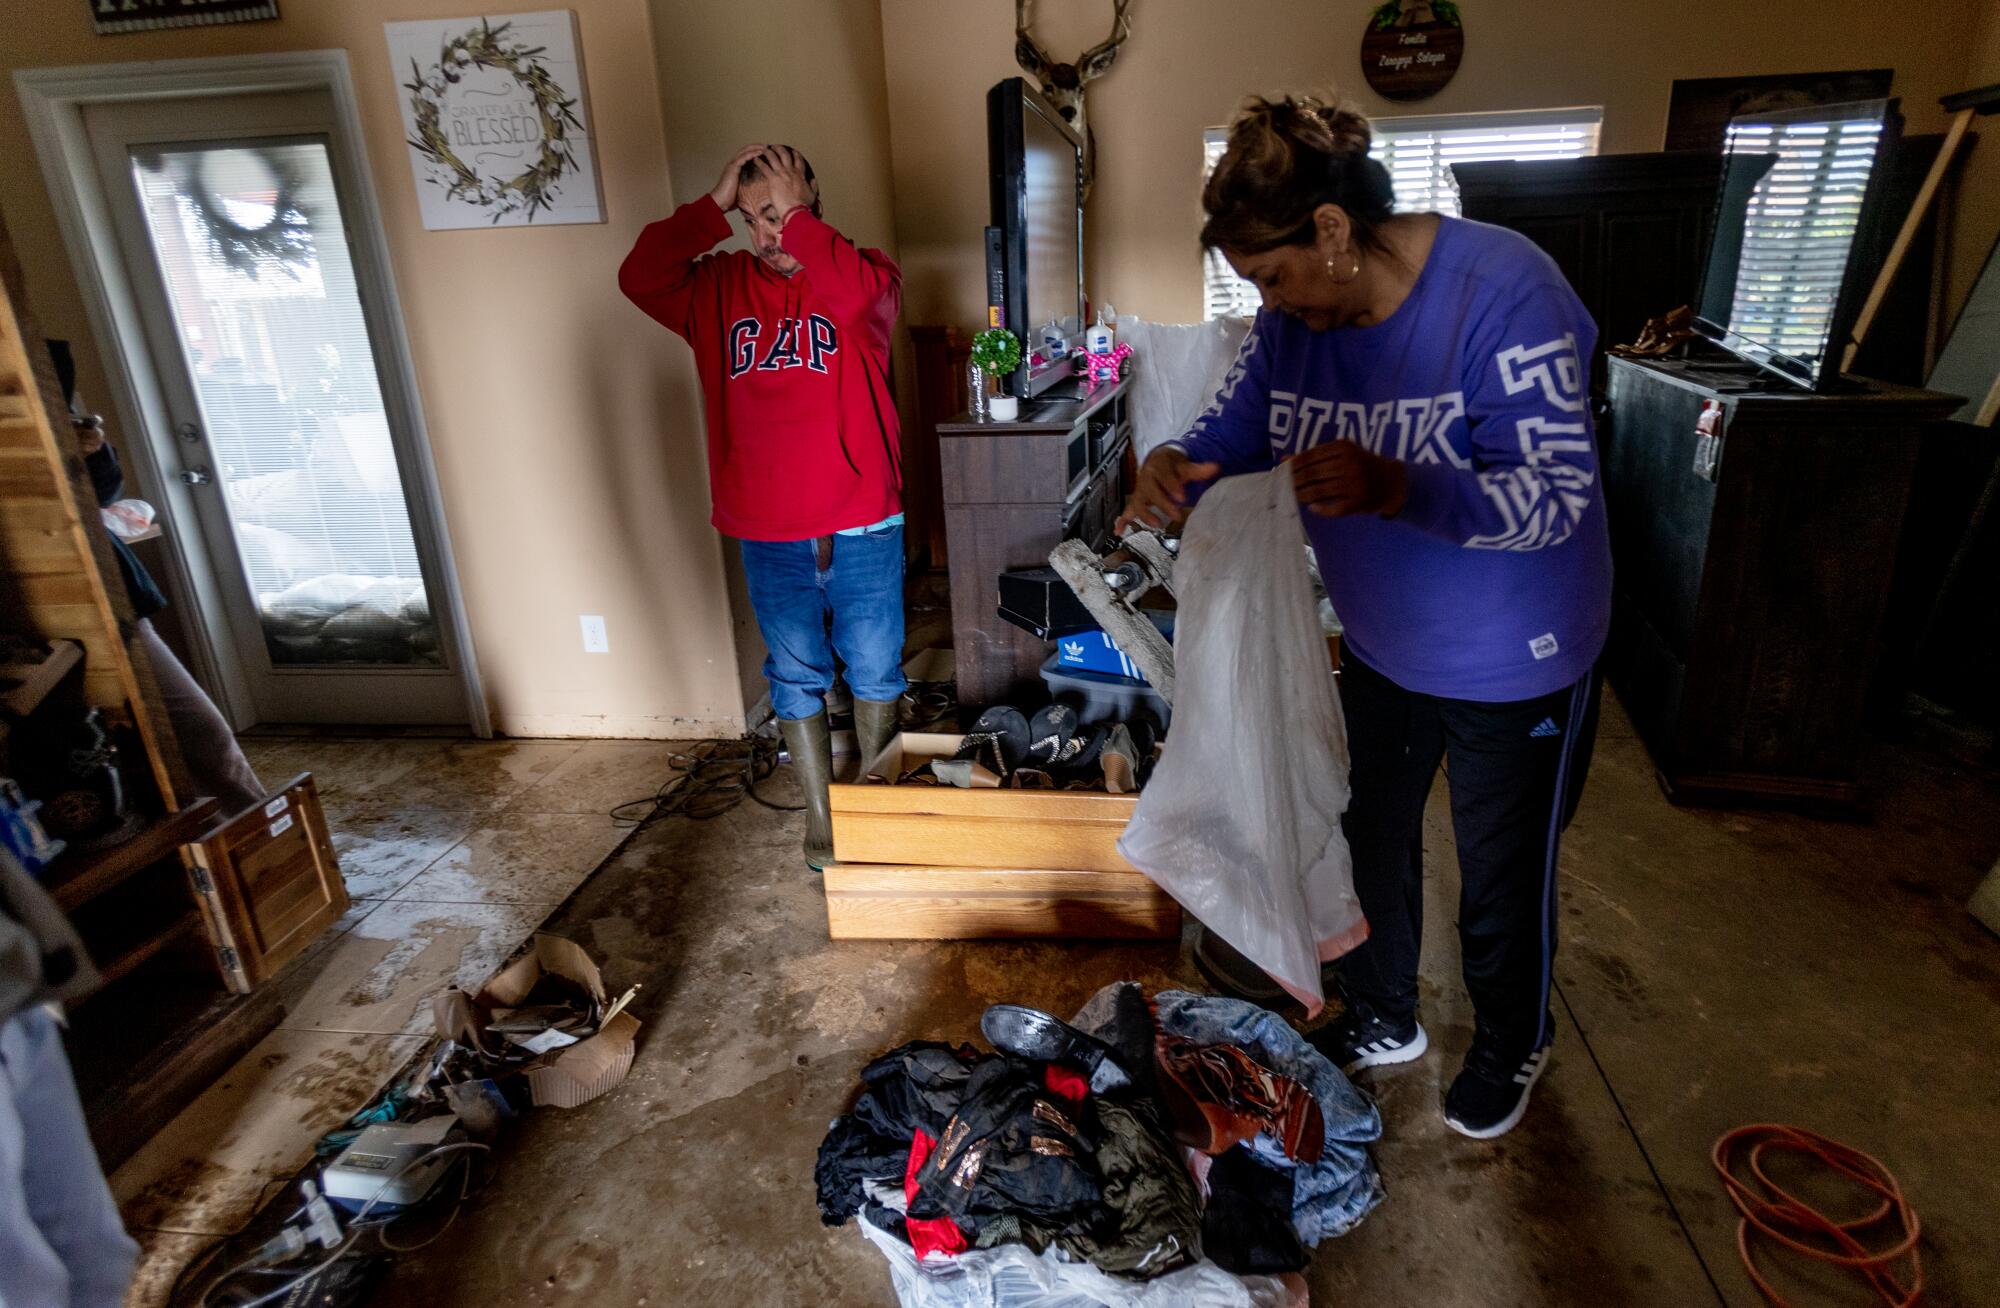 A man grabs his head in frustration while a woman holds a trash bag. Both stand inside a home with muddied, wet floor.